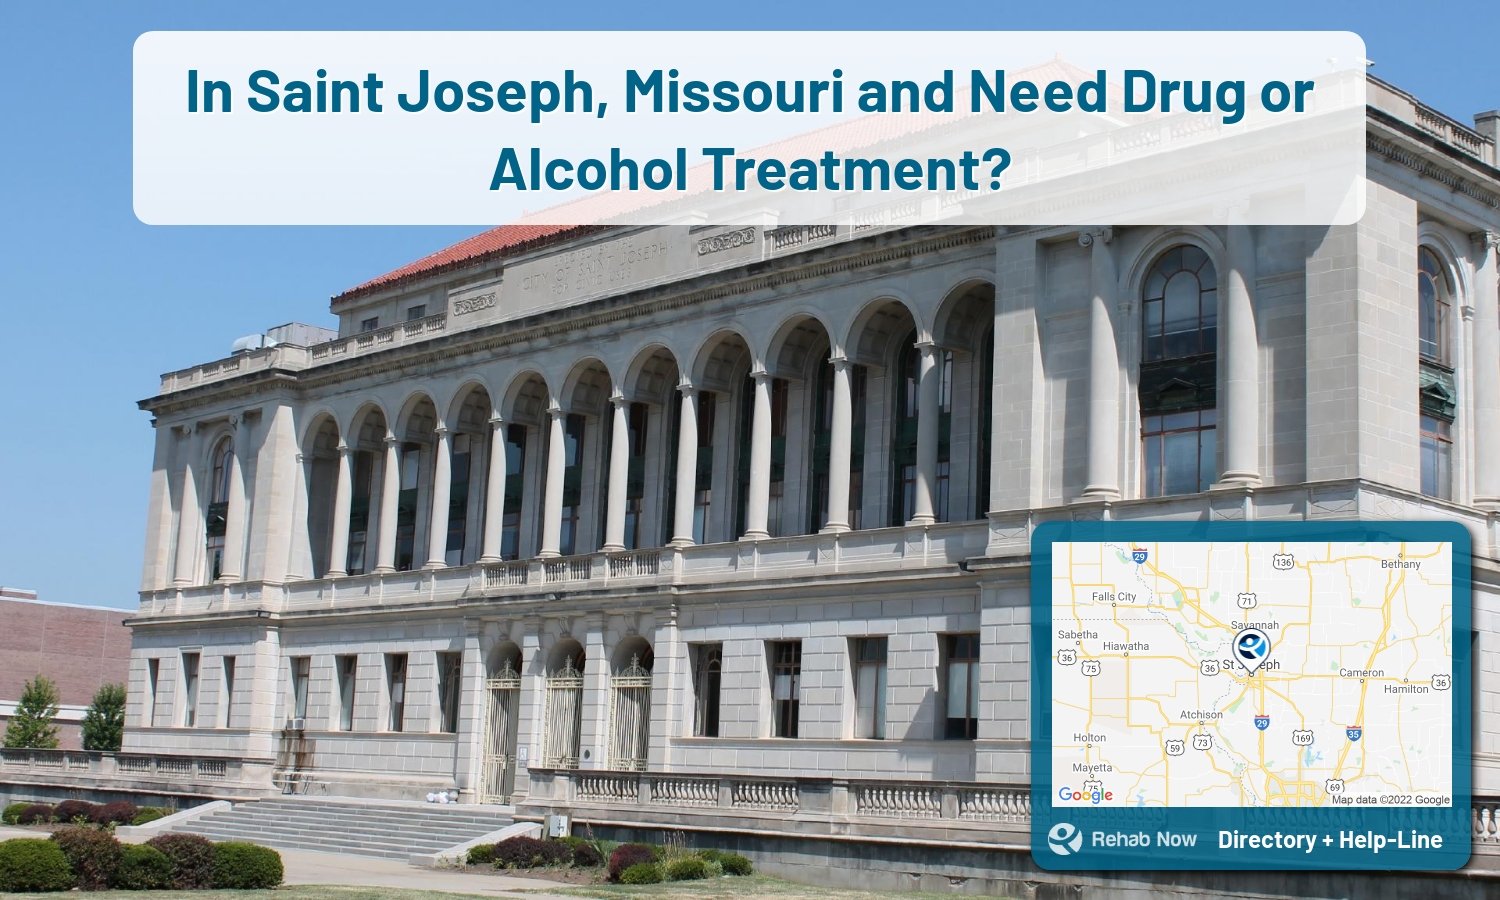 Ready to pick a rehab center in Nicholasville? Get off alcohol, opiates, and other drugs, by selecting top drug rehab centers in Kentucky